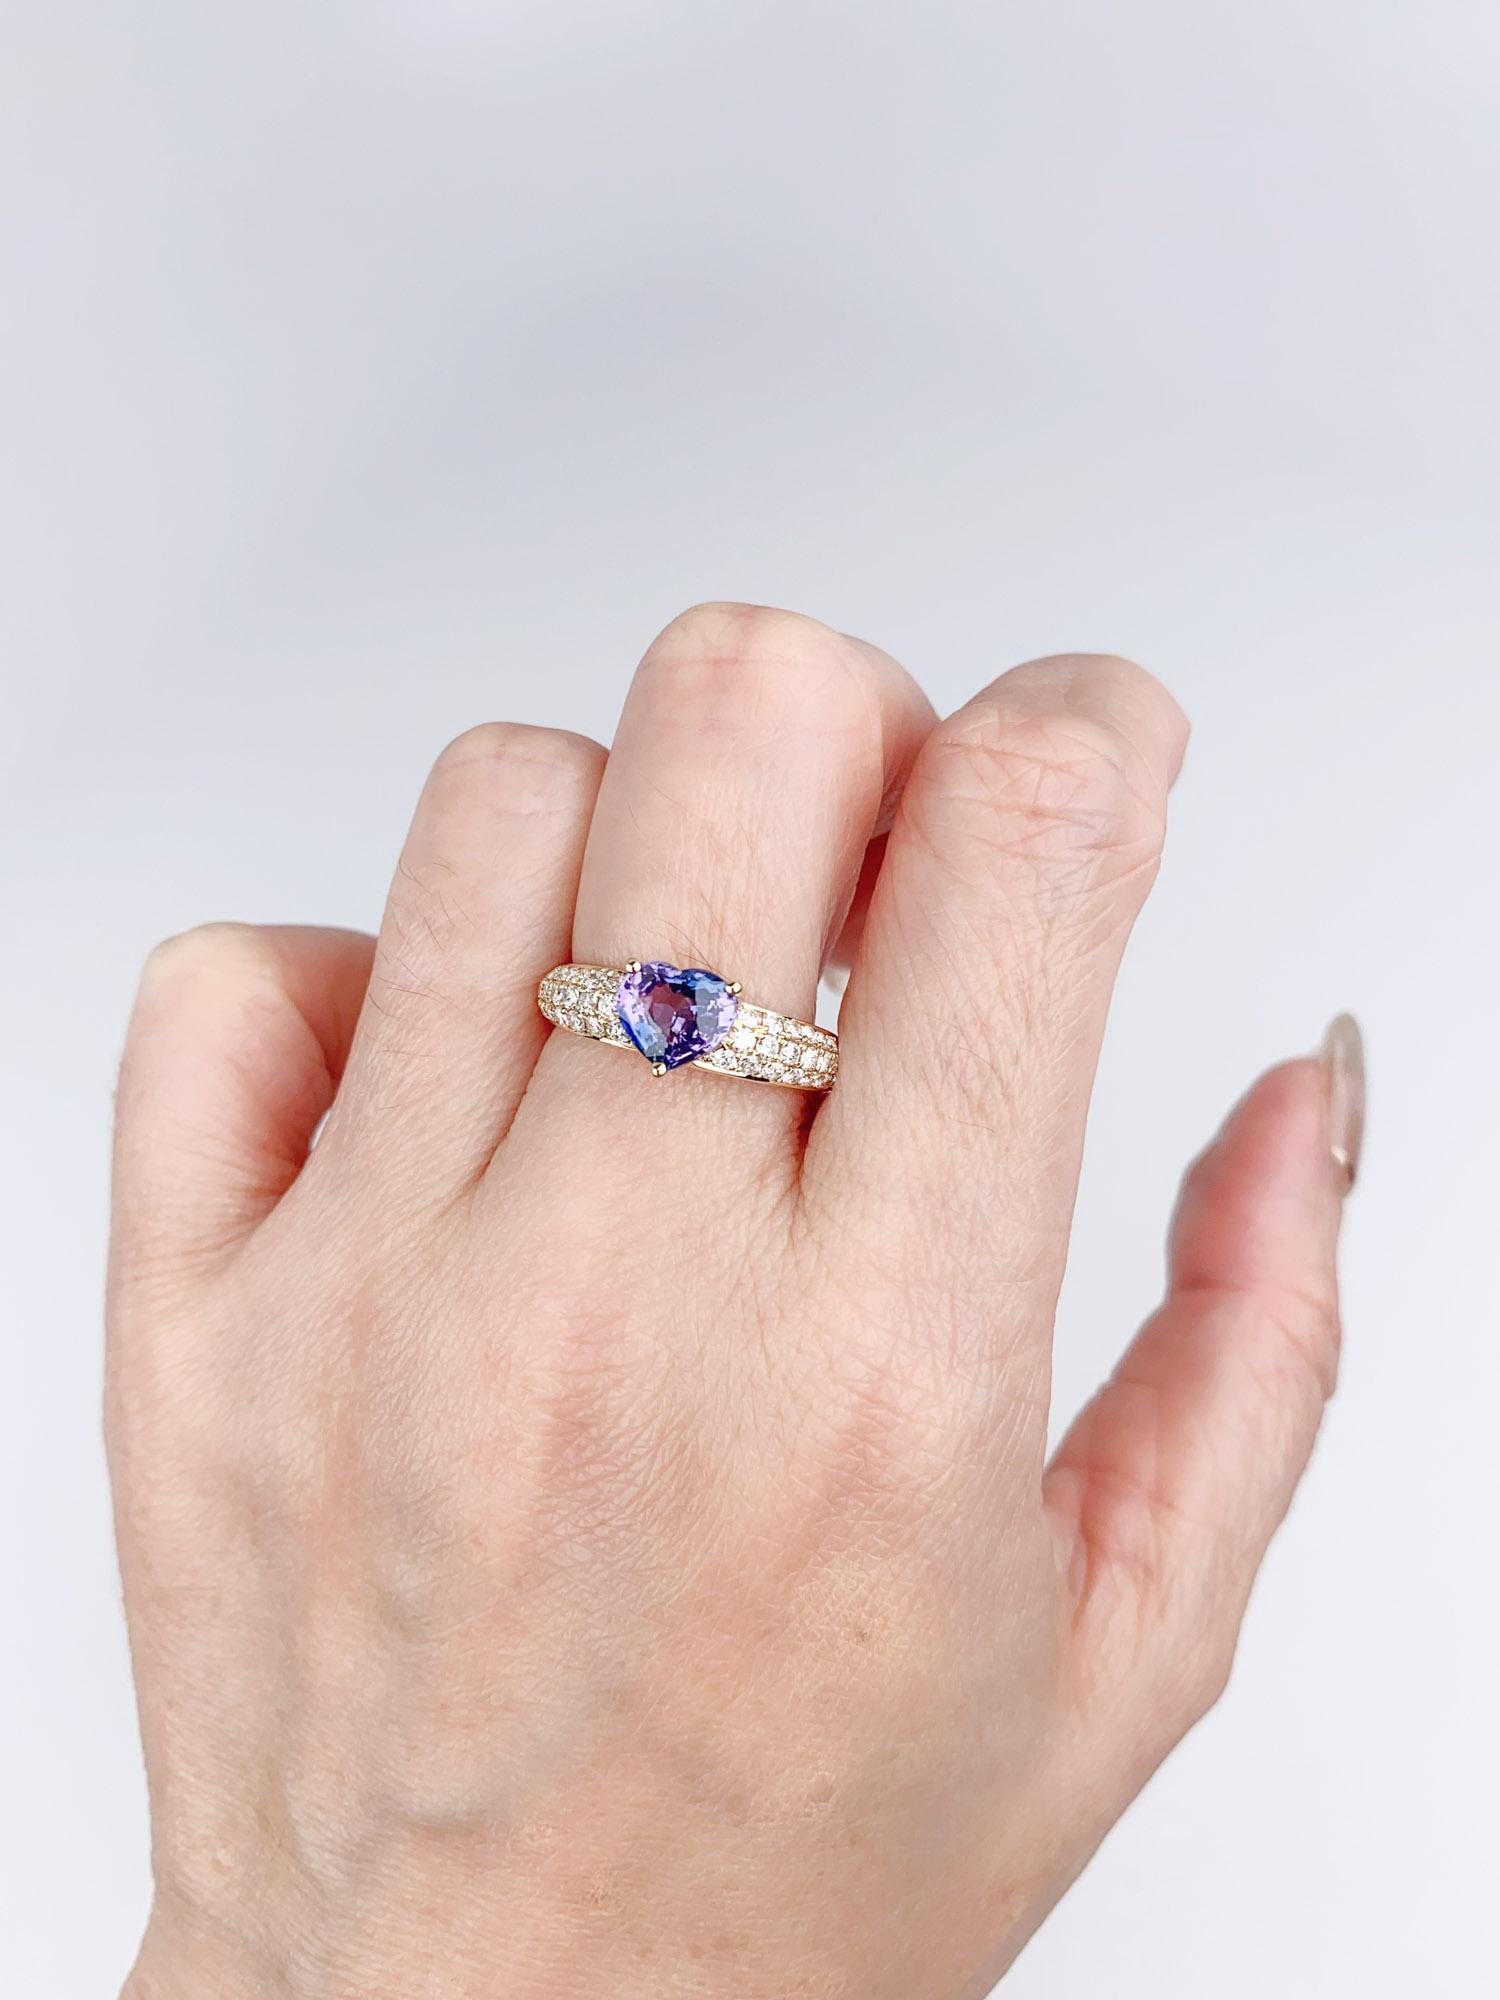 1.5ct Pinkish Purple Sapphire on Diamond Pave Engagement Ring 14K Gold R6499 For Sale 1